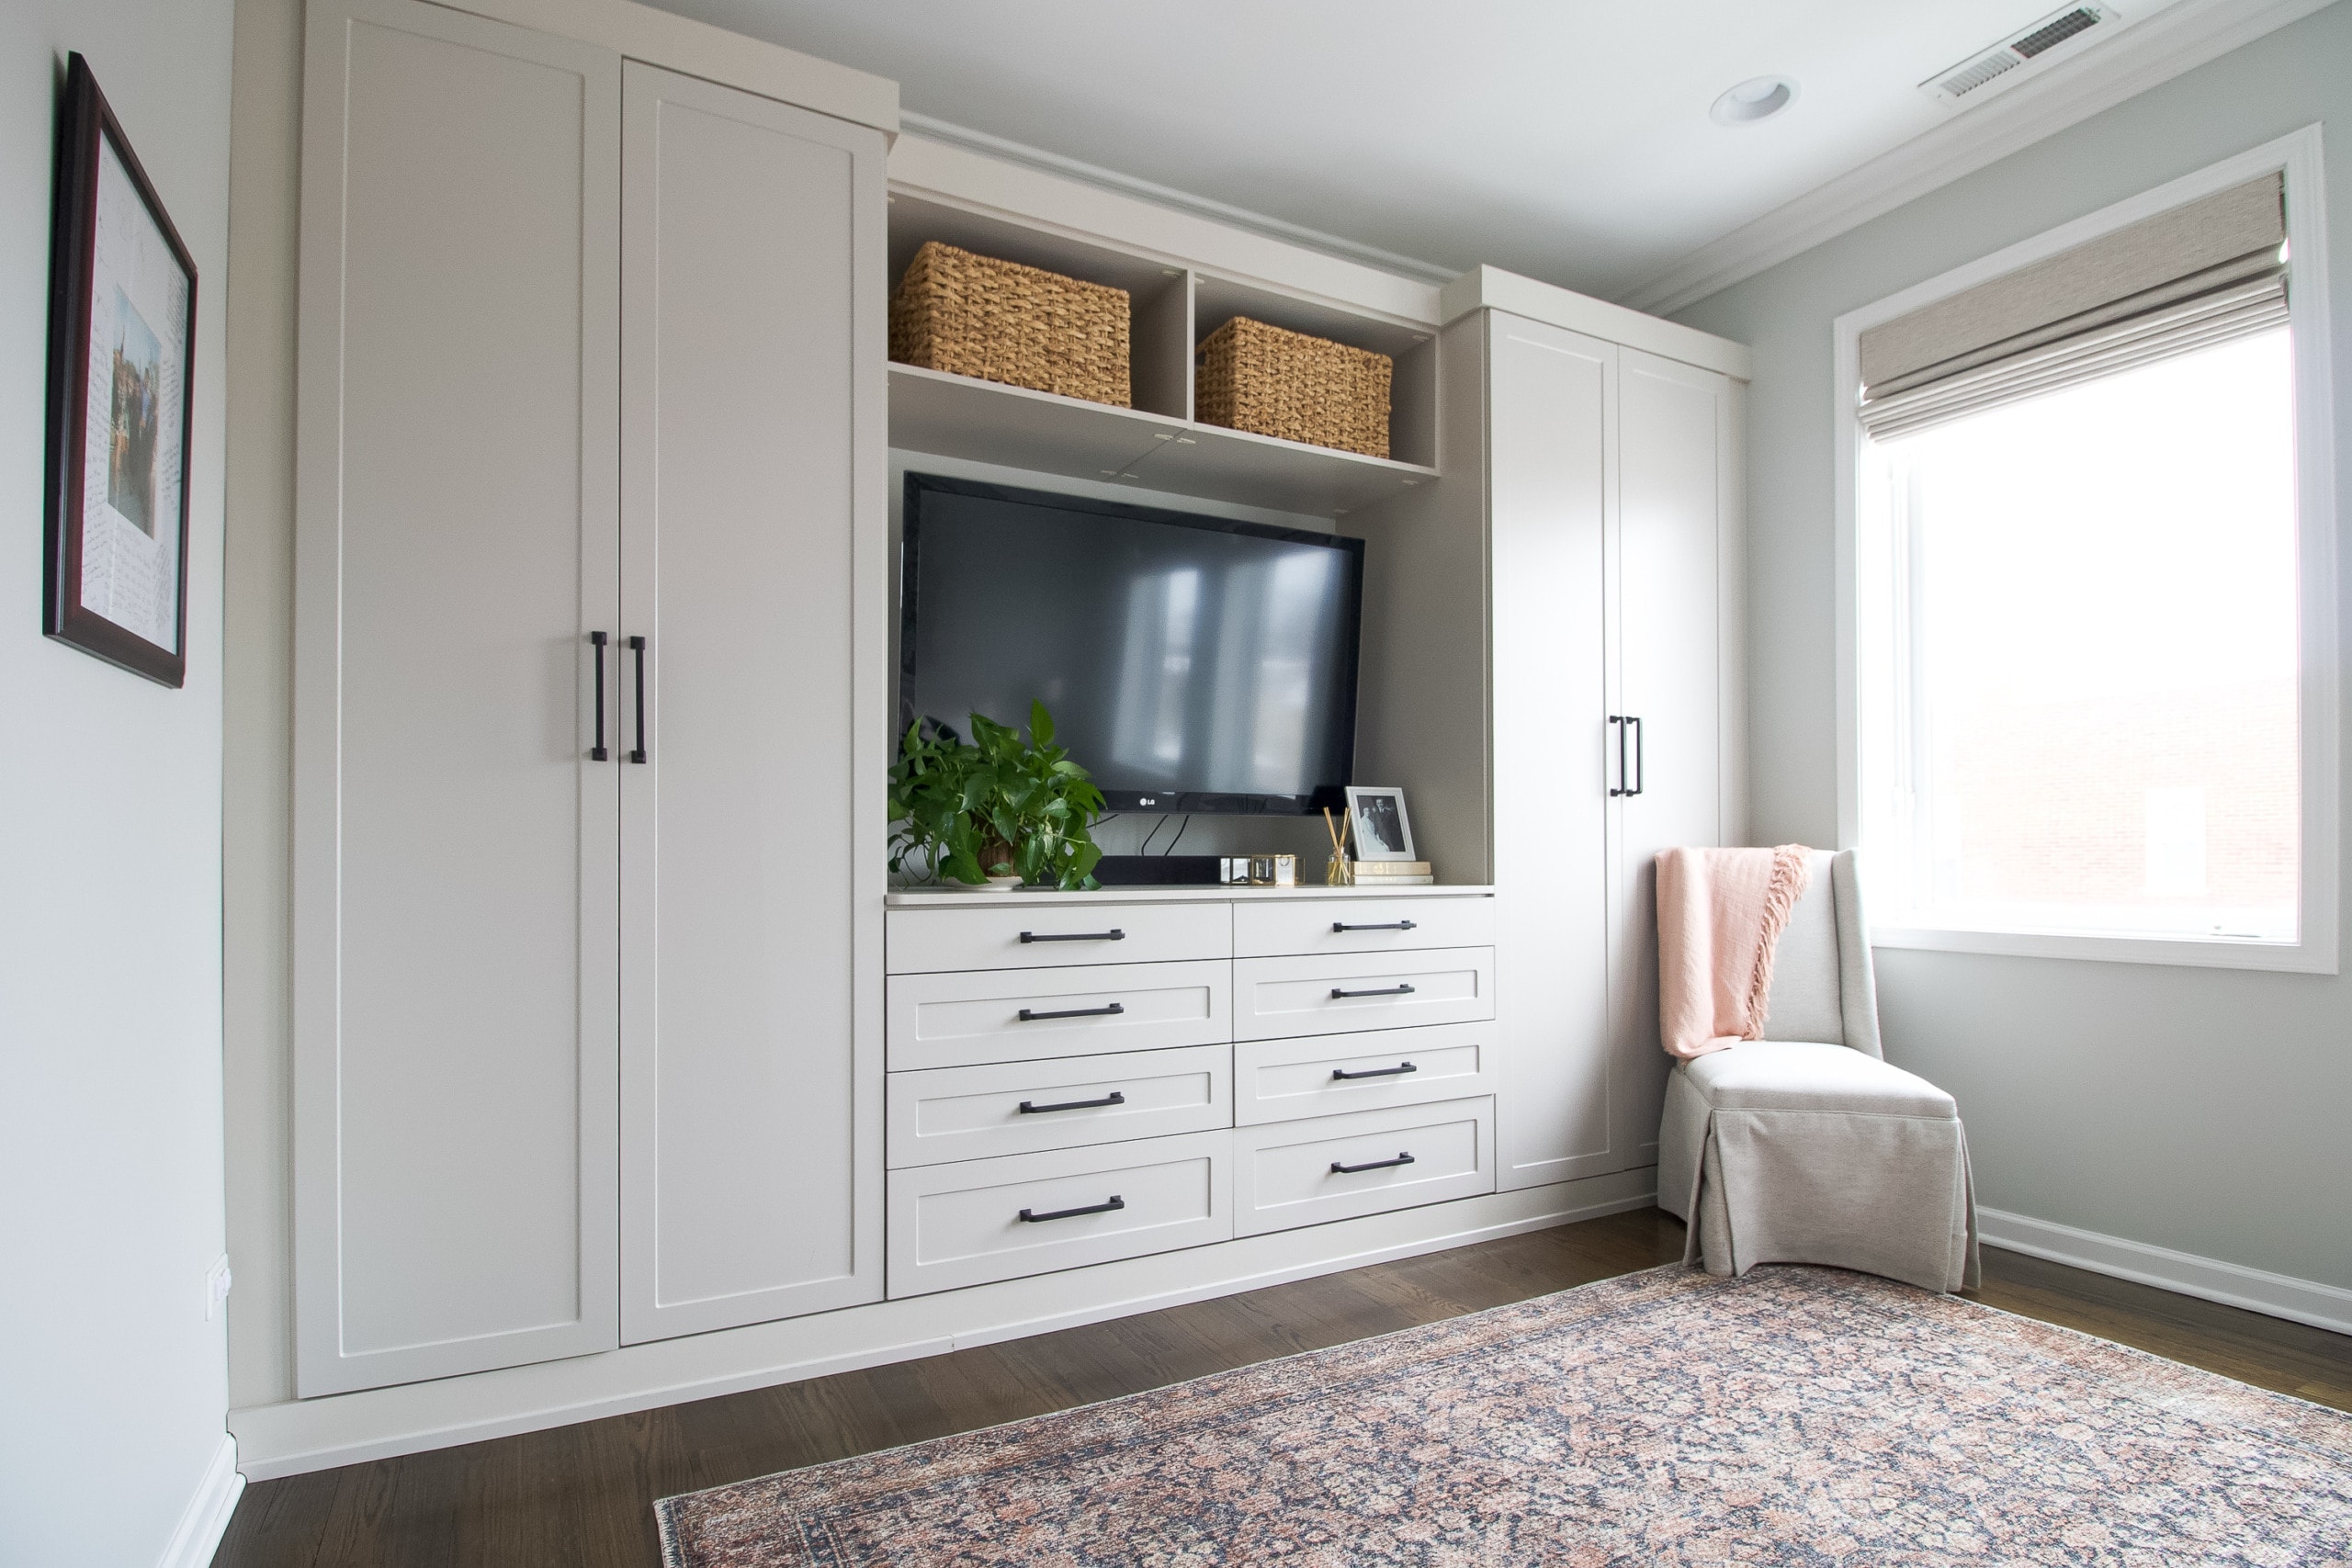 A wall of built-ins in this main bedroom makeover